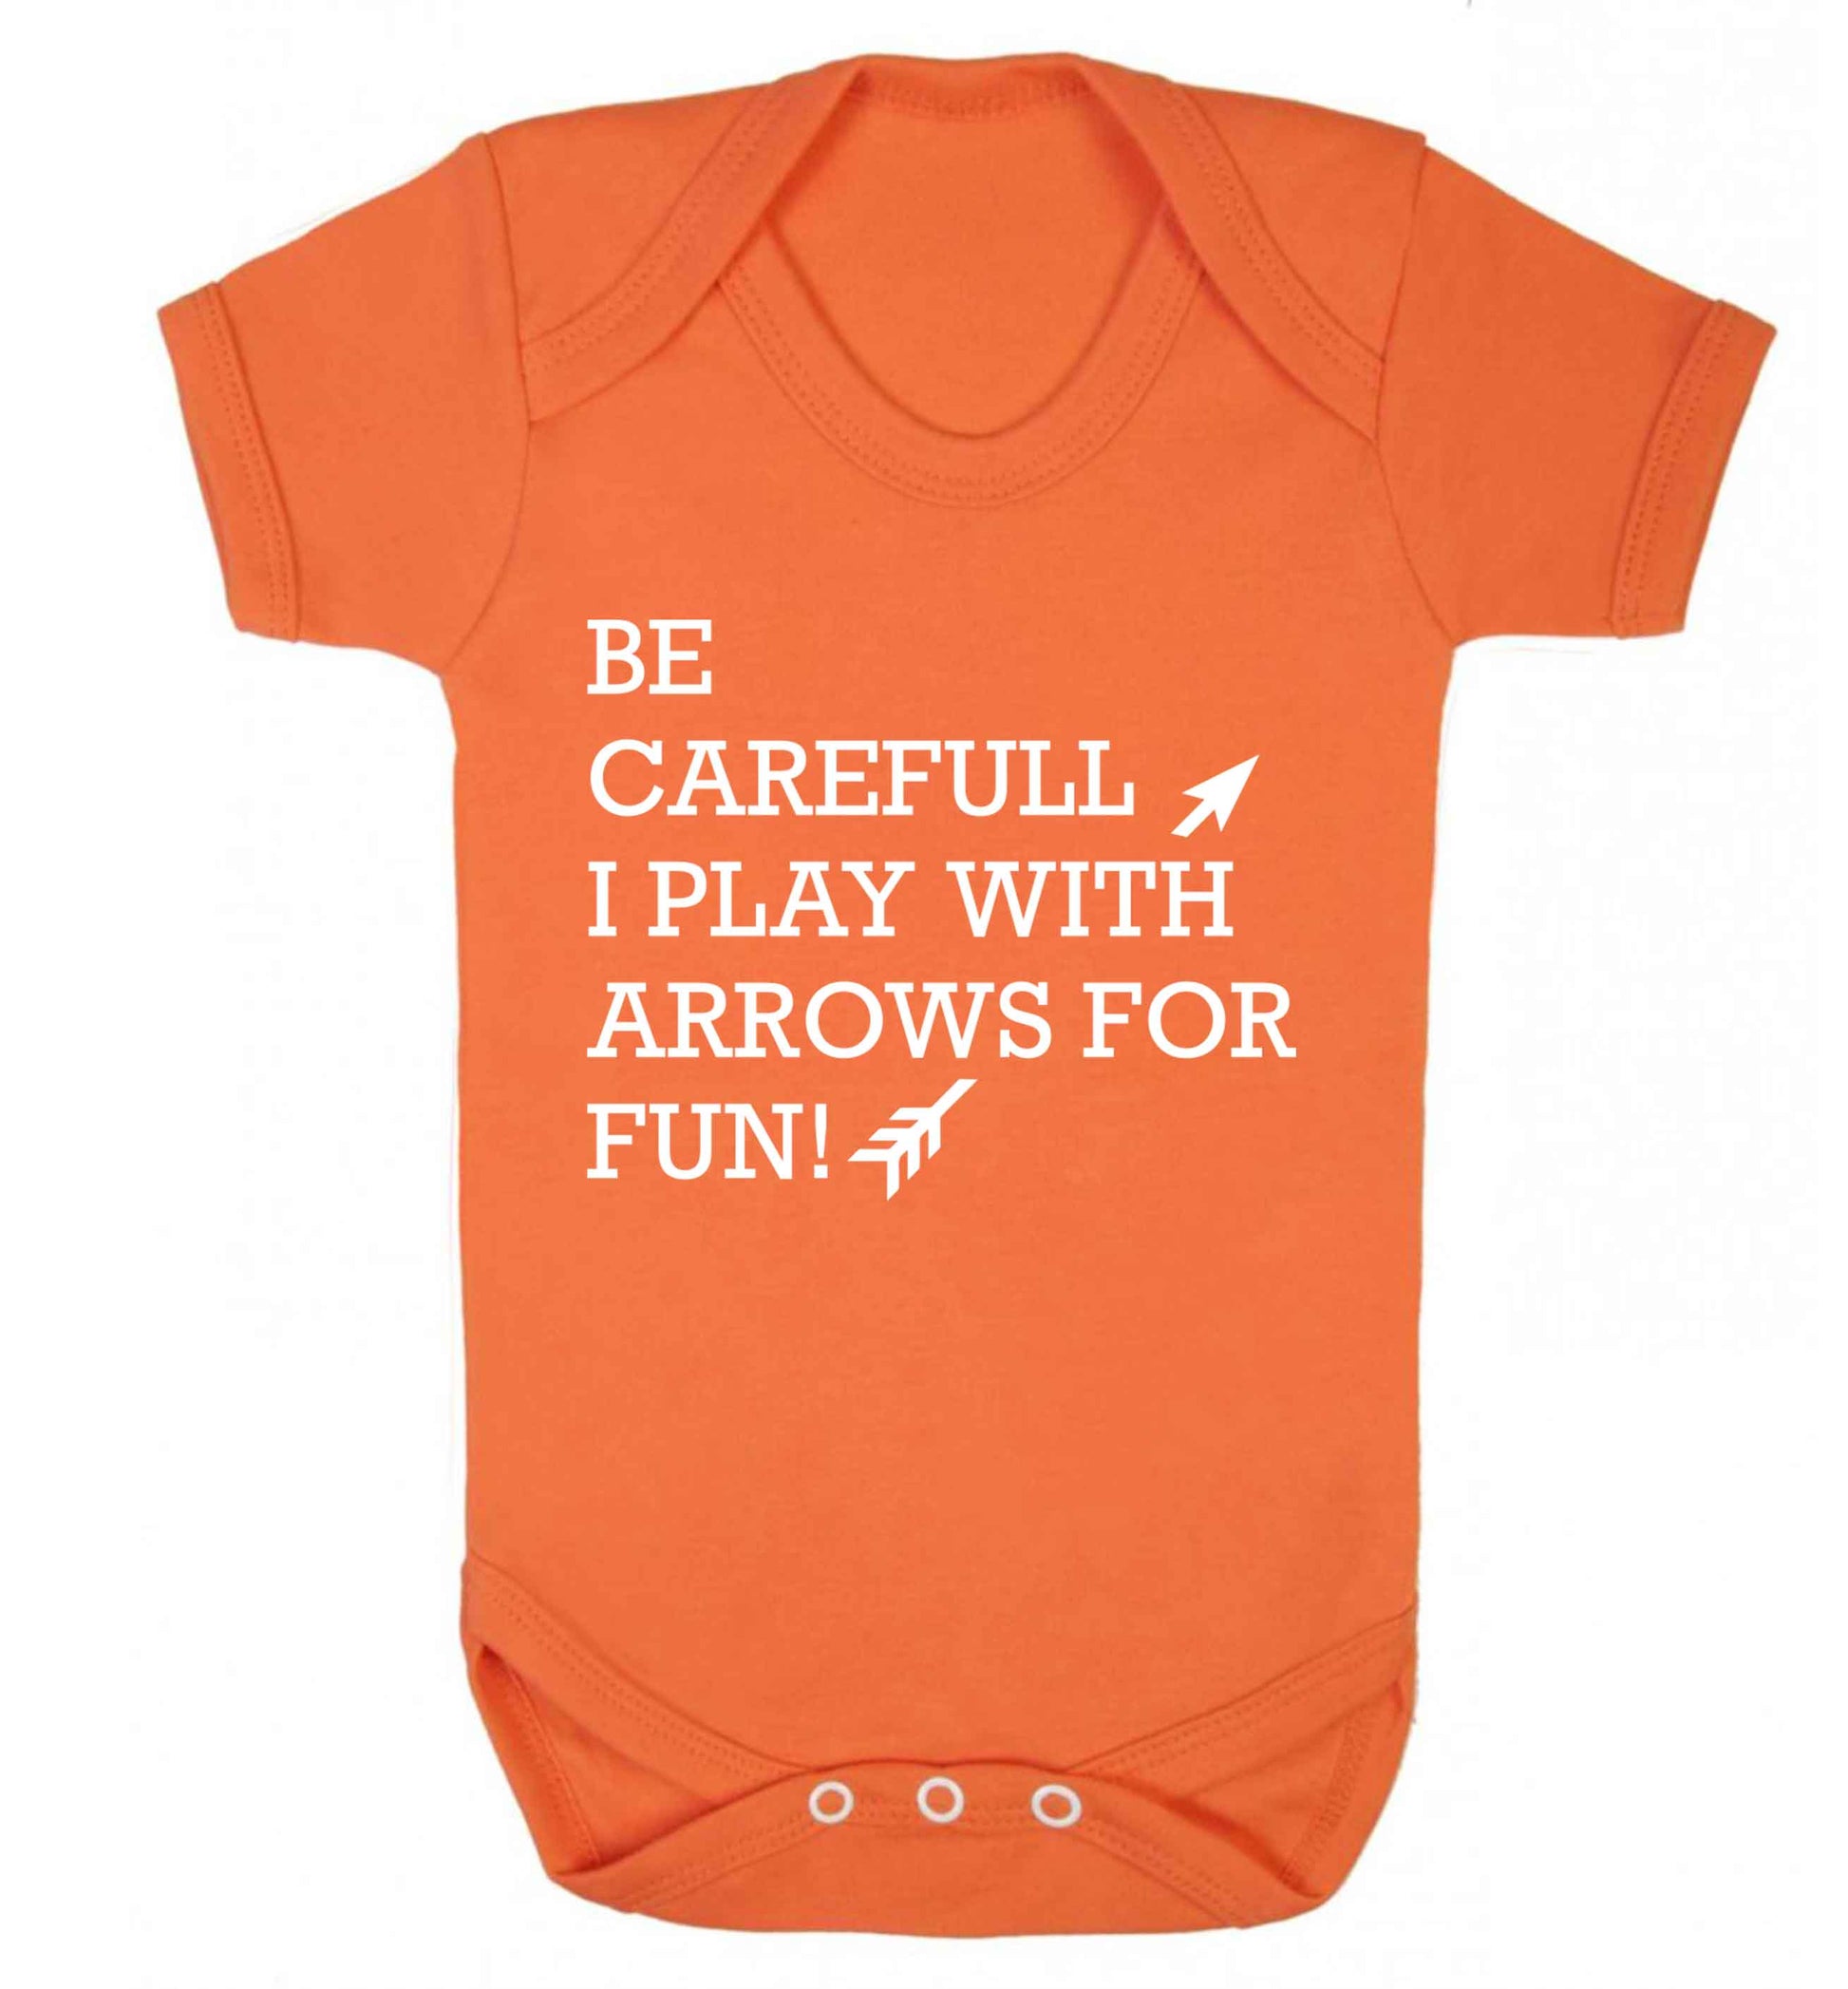 Be carefull I play with arrows for fun Baby Vest orange 18-24 months